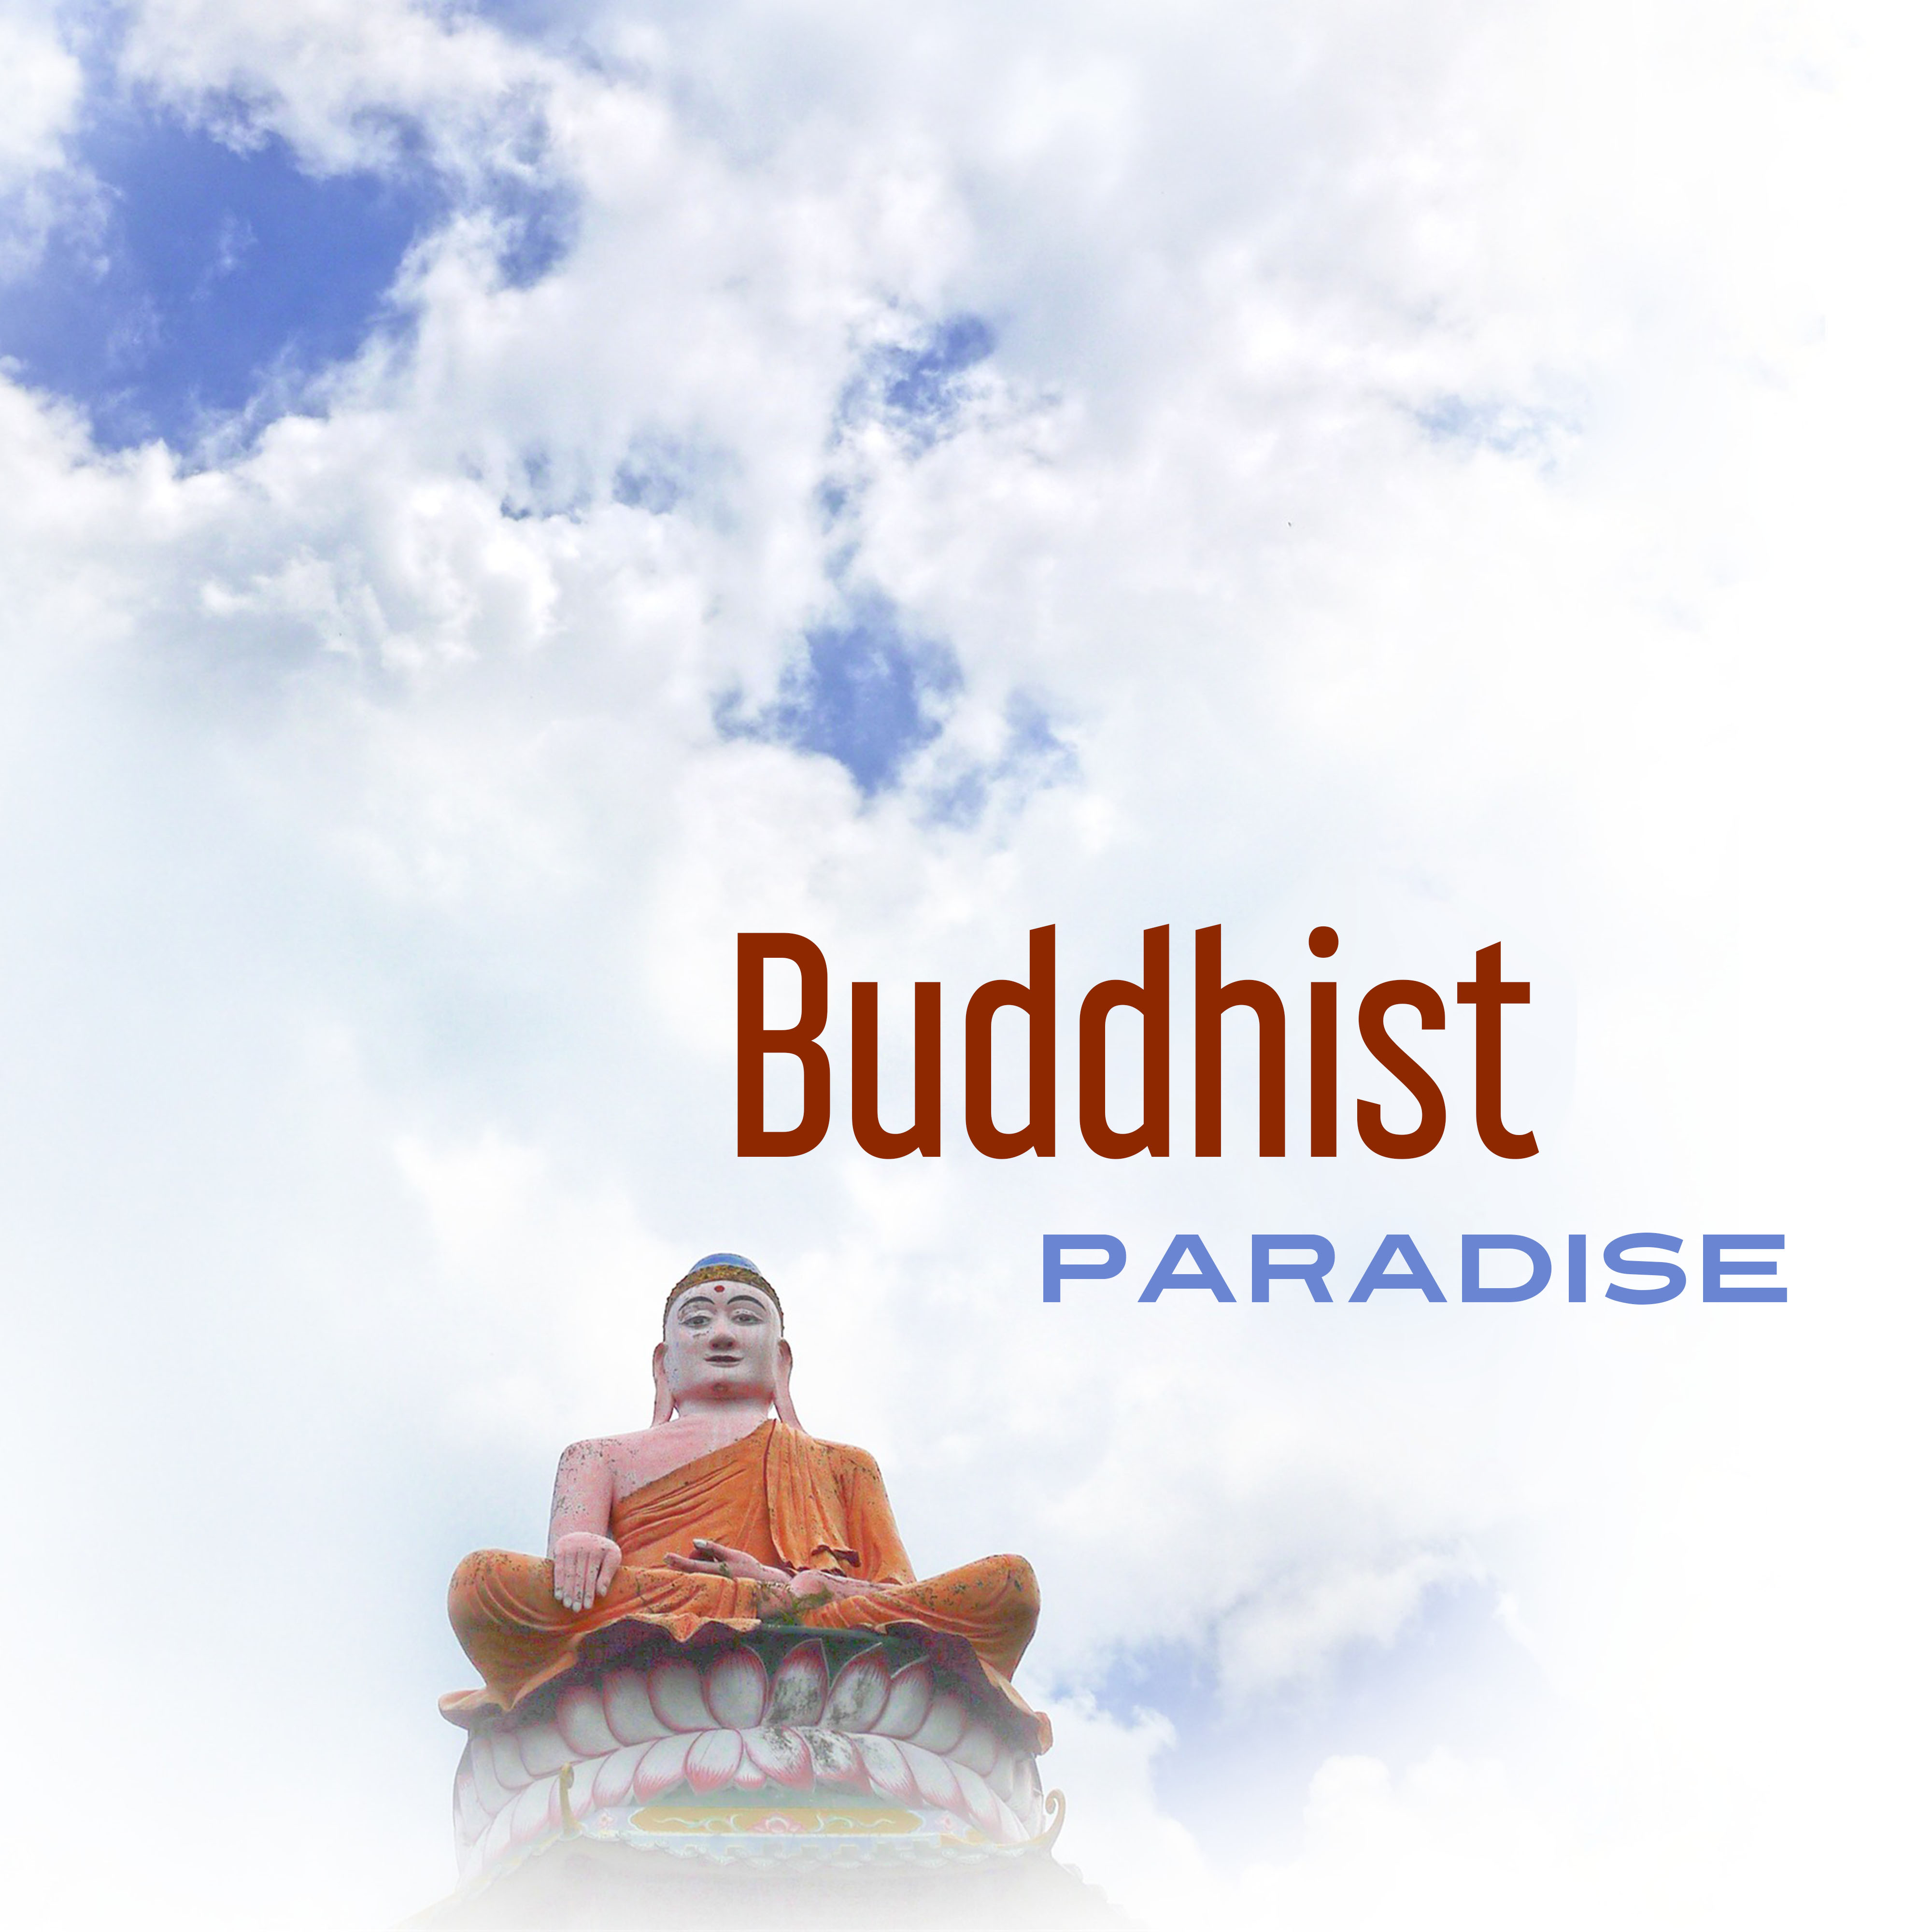 Buddhist Paradise - Sun Salutation, Chill Out Music, Relaxing Sounds, Buddha Lounge, Ambient Music, Deep Chill